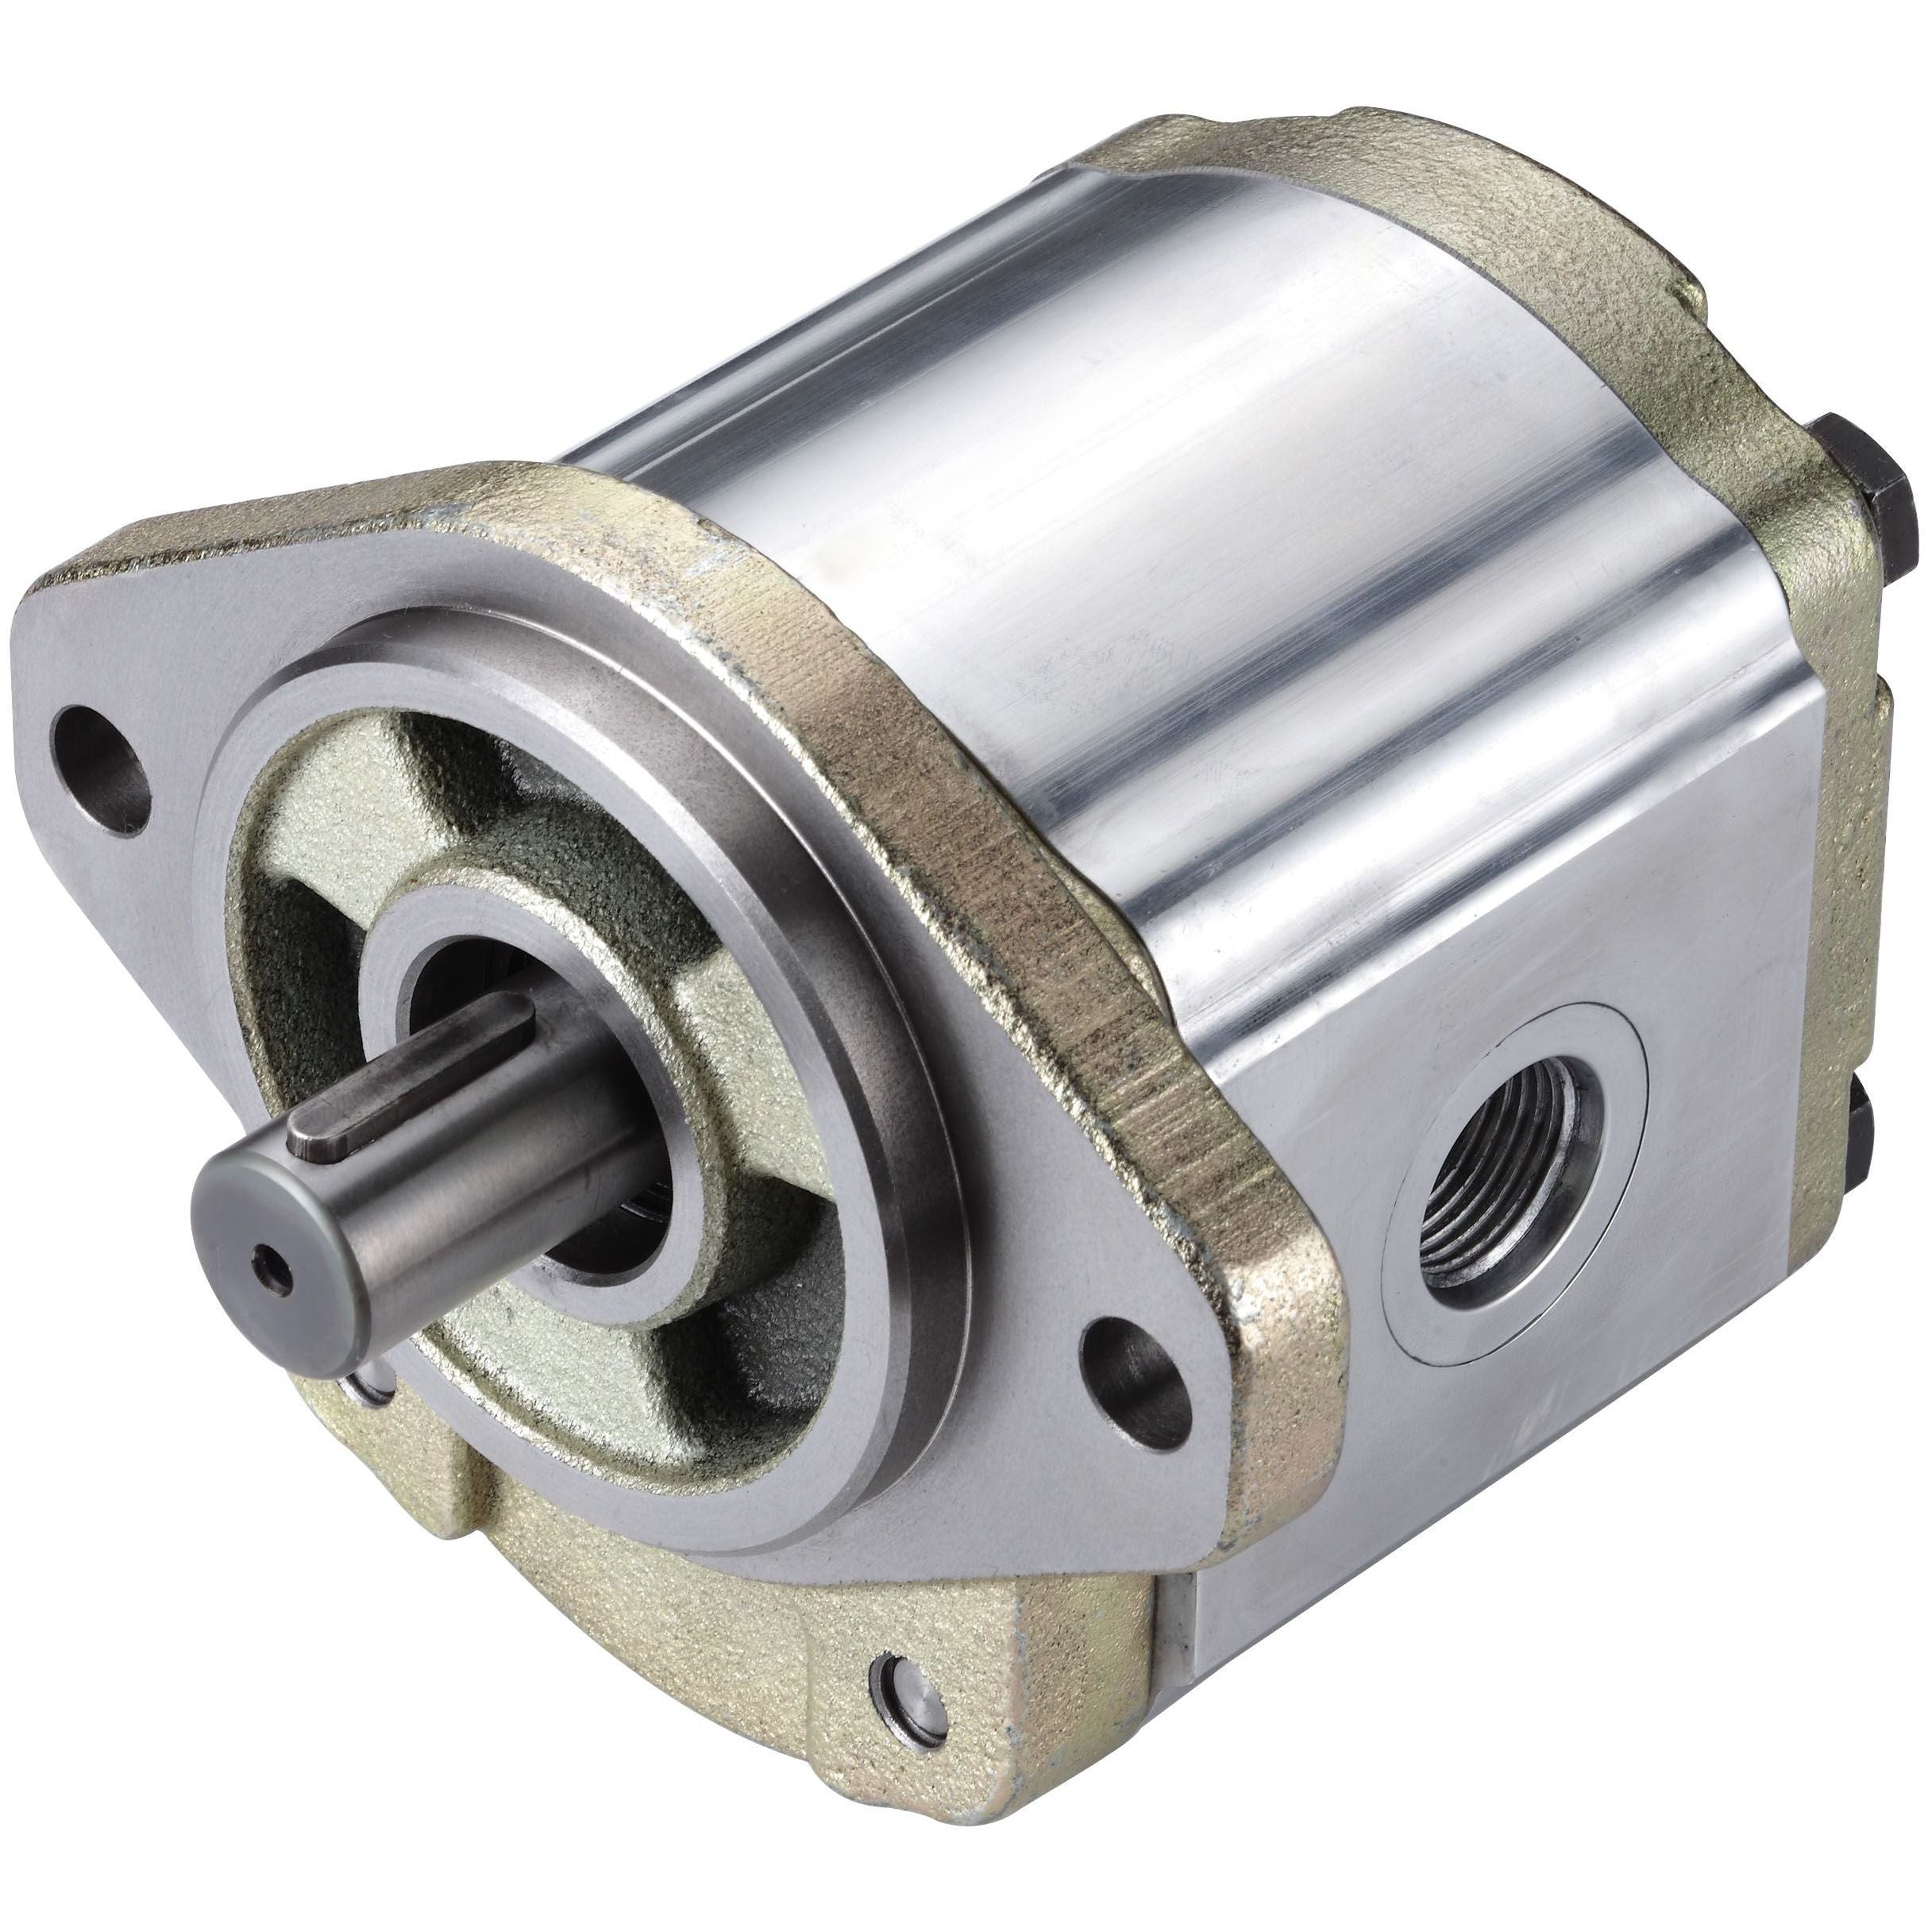 3GB8ZU380R : Honor Gear Pump, CW Rotation, 80cc (4.88in3), 38.04 GPM, 2100psi, 2300 RPM, #20 SAE (1.25") In, #16 SAE (1") Out, Splined Shaft 13-Tooth, 16/32 Pitch, SAE B 2-Bolt Mount